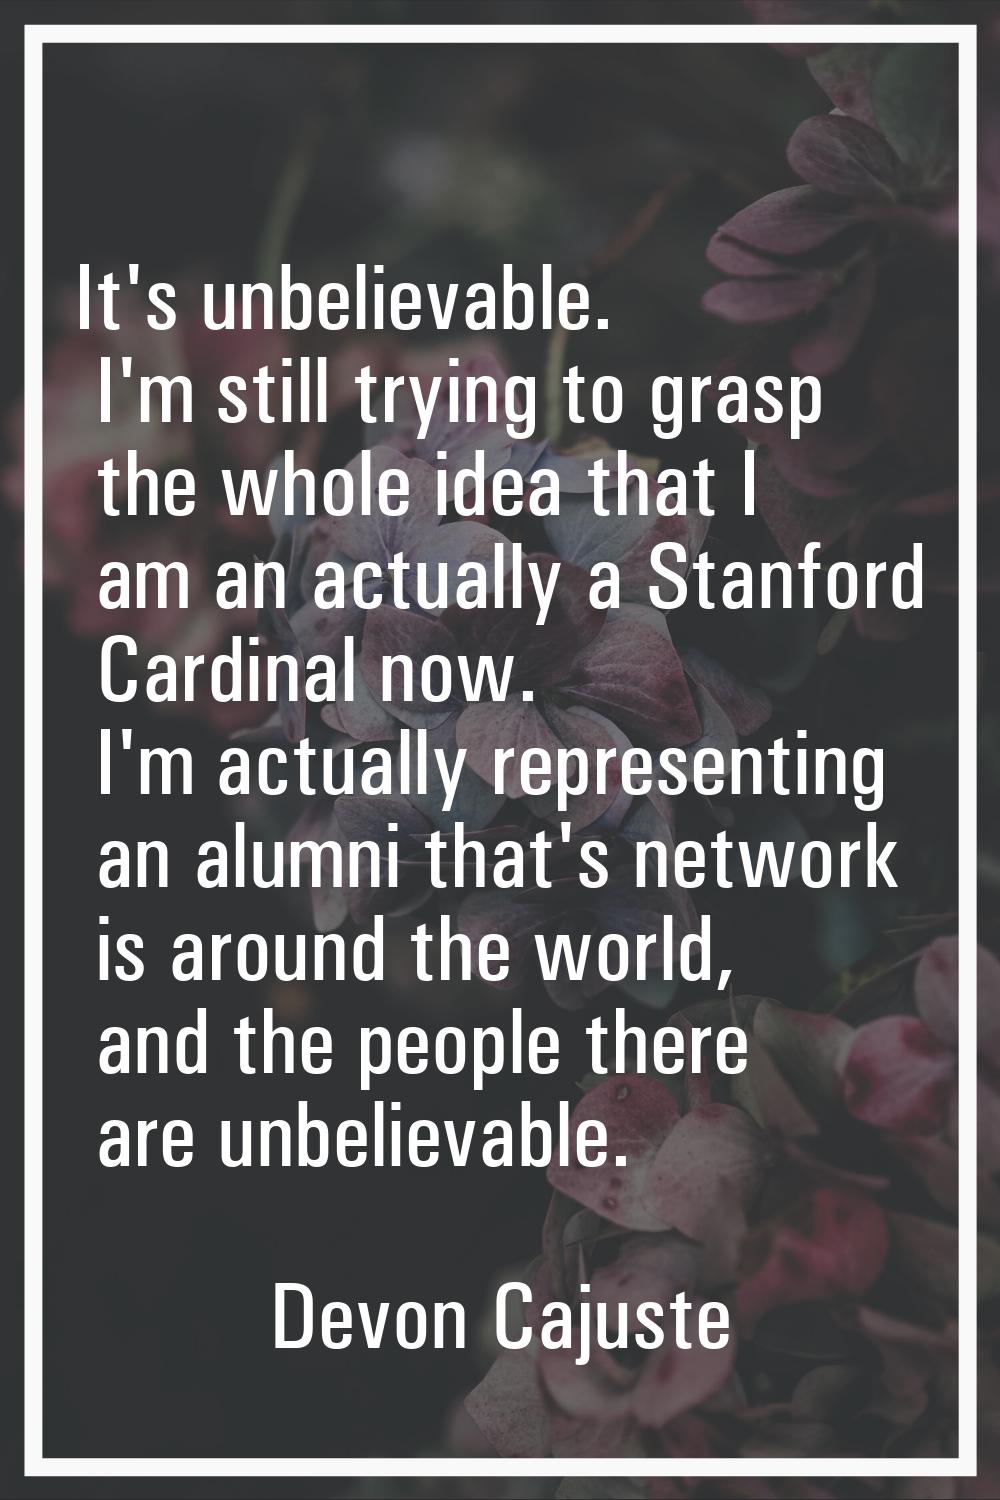 It's unbelievable. I'm still trying to grasp the whole idea that I am an actually a Stanford Cardin